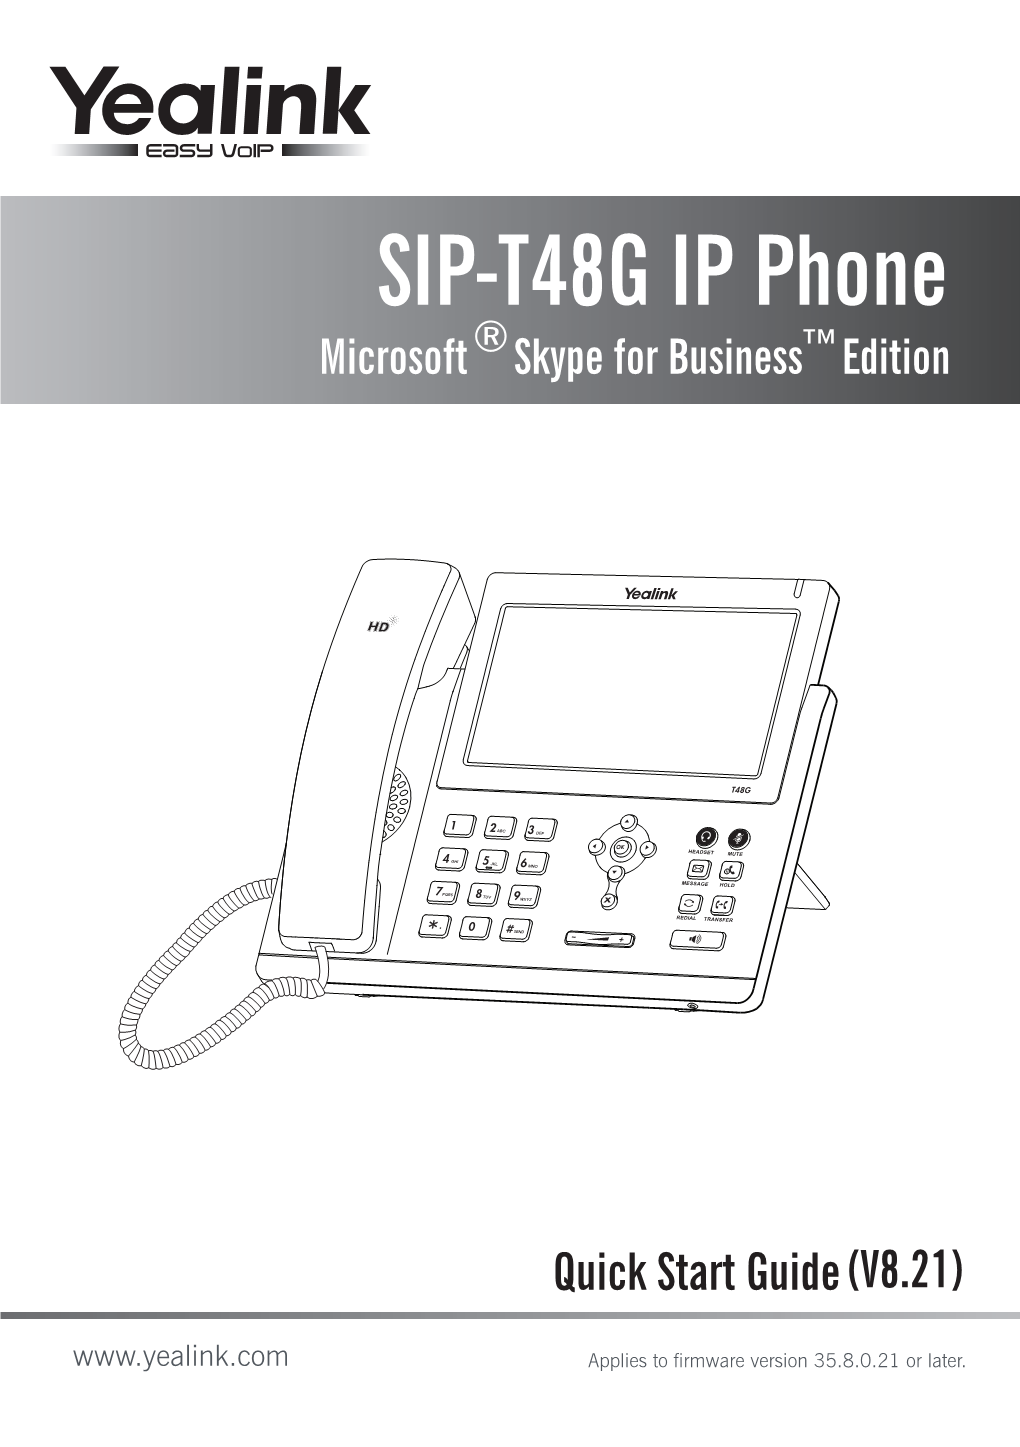 SIP-T48G IP Phone Microsoft ® Skype for Business™ Edition